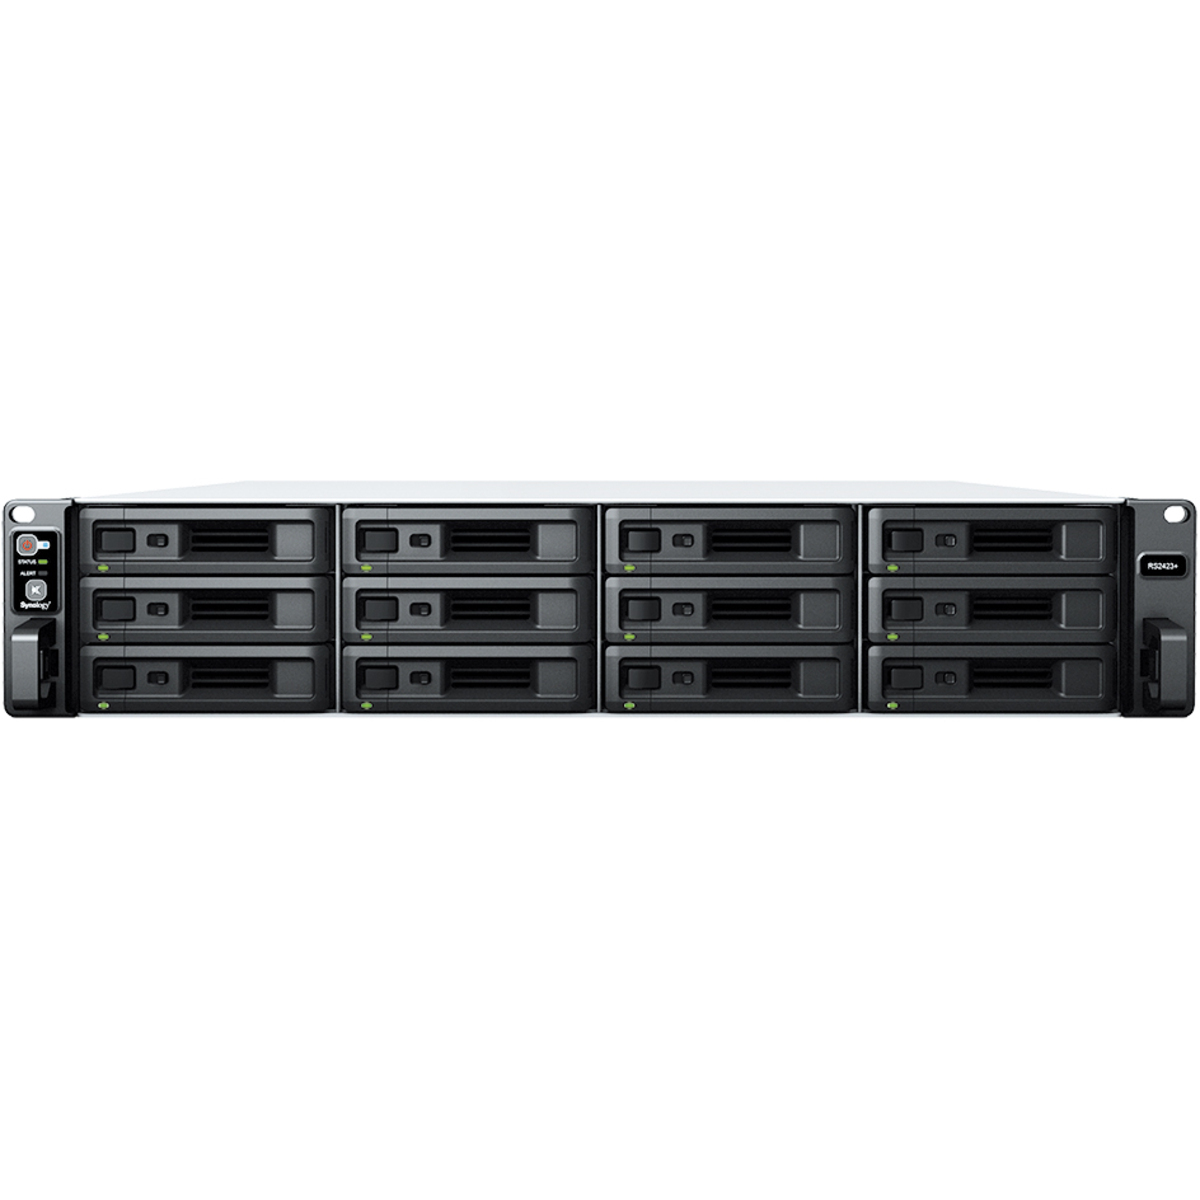 Synology RackStation RS2423RP+ 216tb 12-Bay RackMount Multimedia / Power User / Business NAS - Network Attached Storage Device 12x18tb Western Digital Gold WD181KRYZ 3.5 7200rpm SATA 6Gb/s HDD ENTERPRISE Class Drives Installed - Burn-In Tested - FREE RAM UPGRADE RackStation RS2423RP+